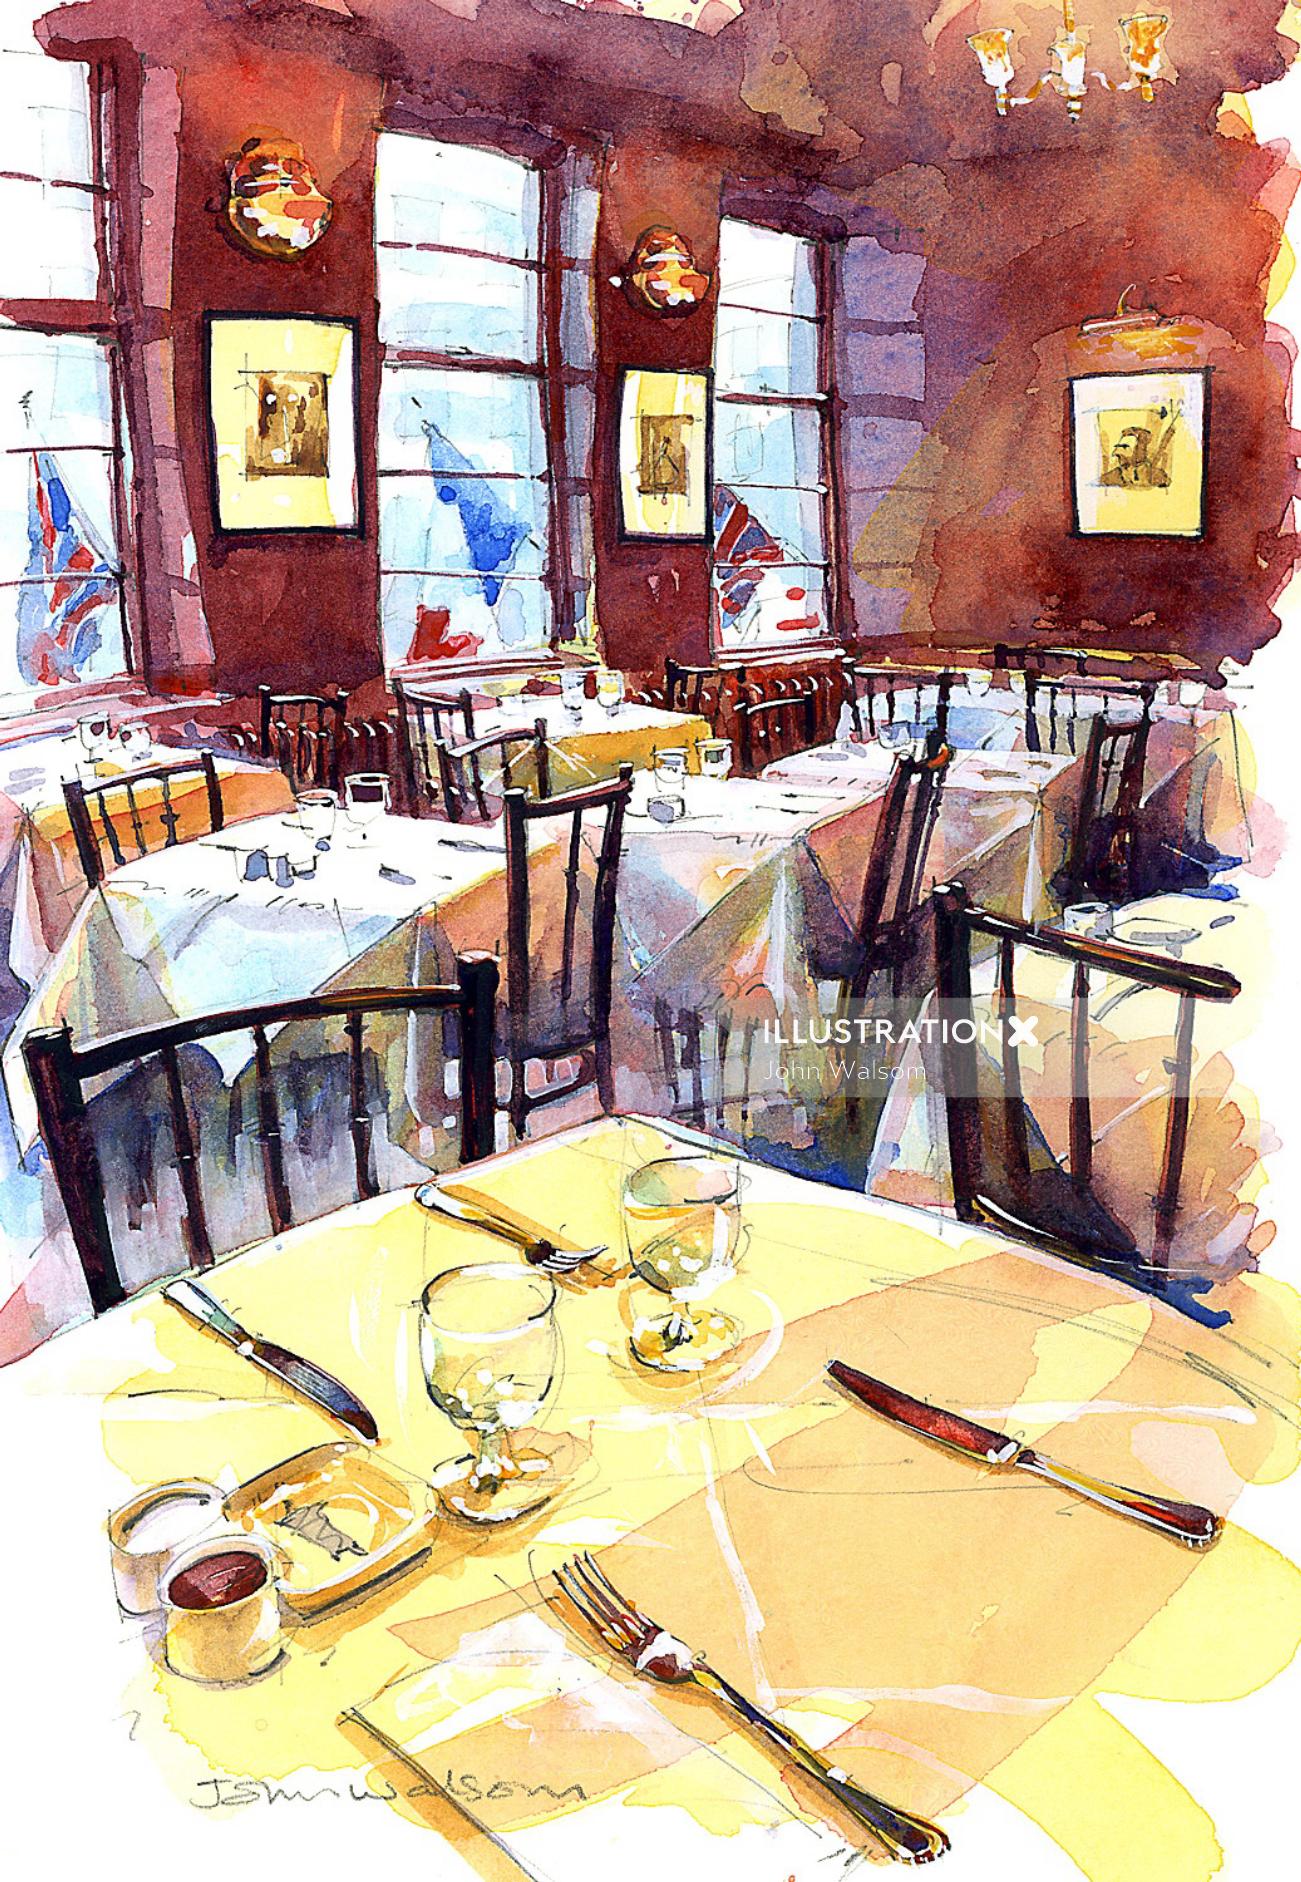 The French House Restaurant illustration by John Walsom